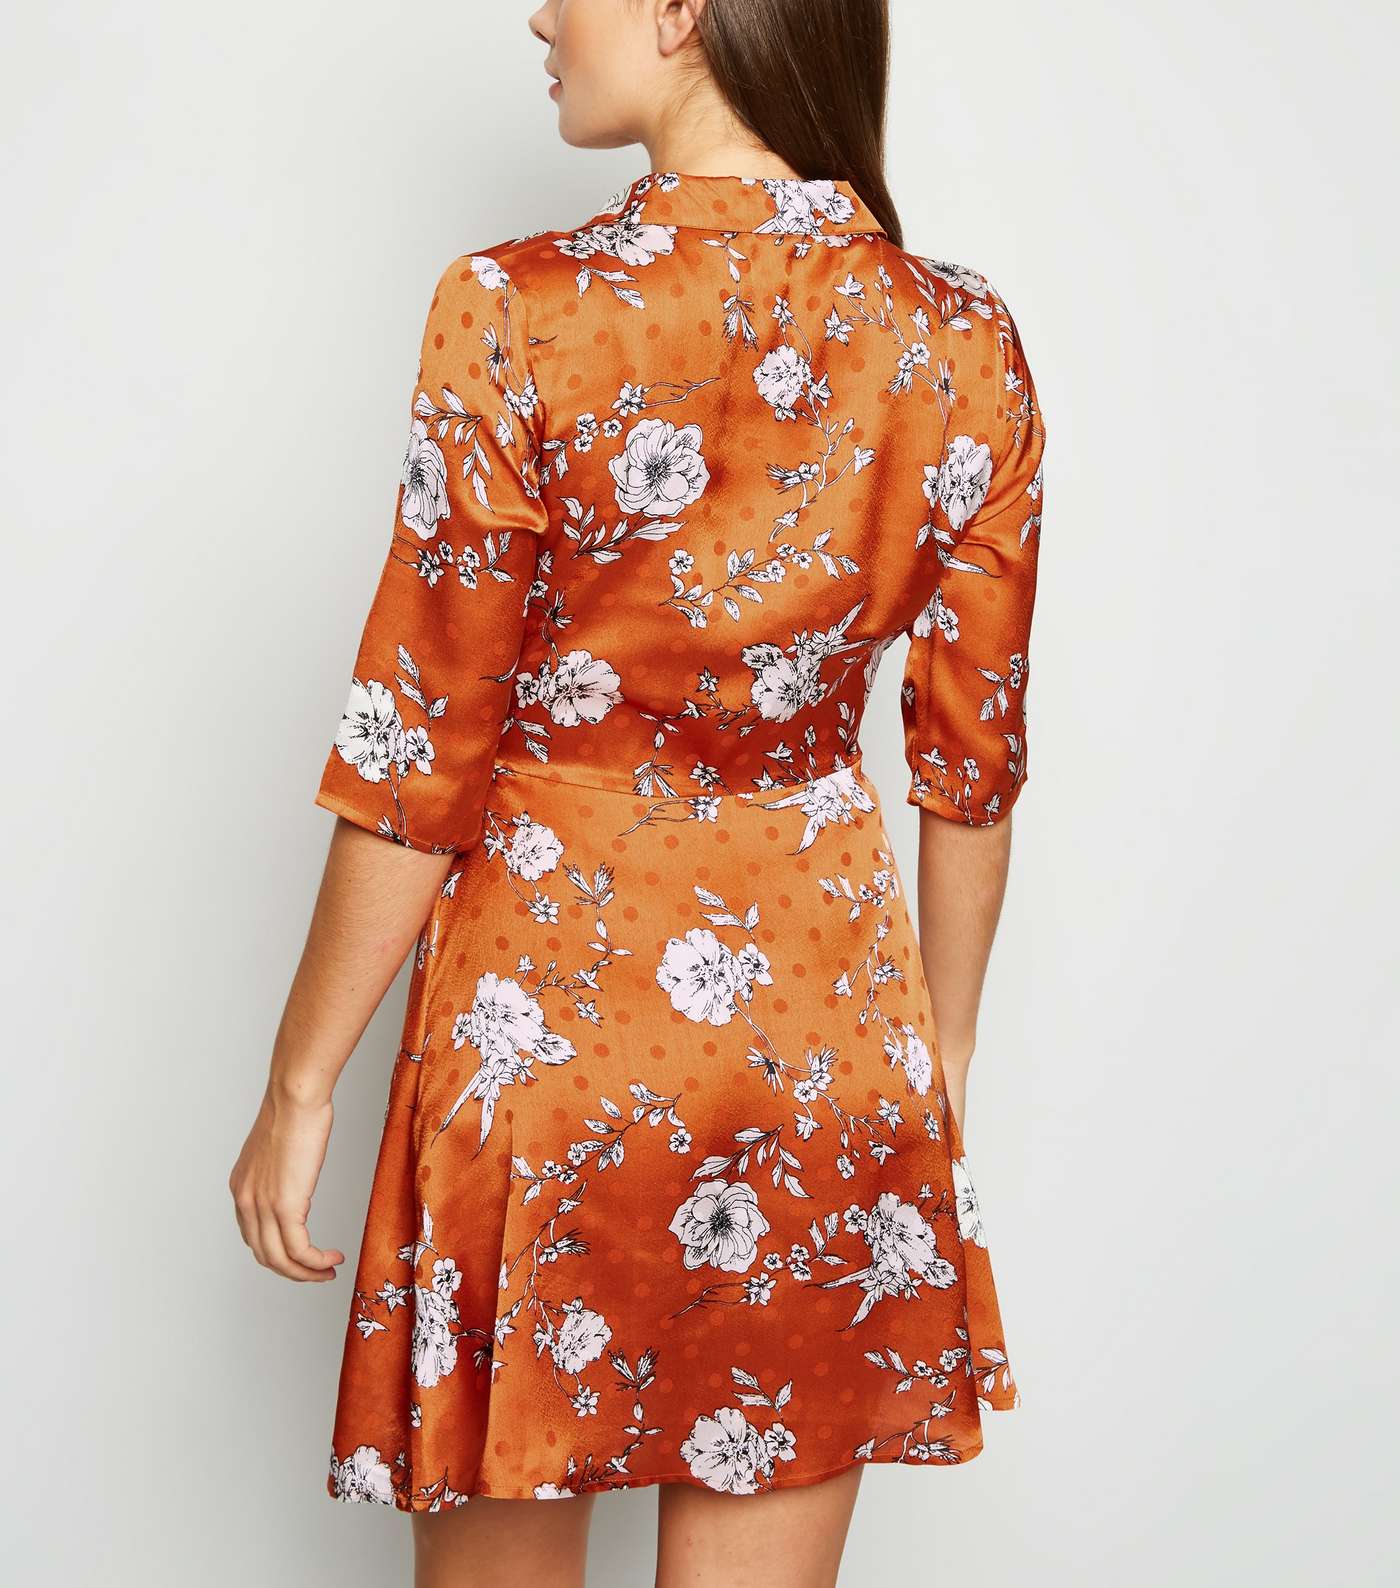 Blue Vanilla Rust Floral and Spot Dress Image 3